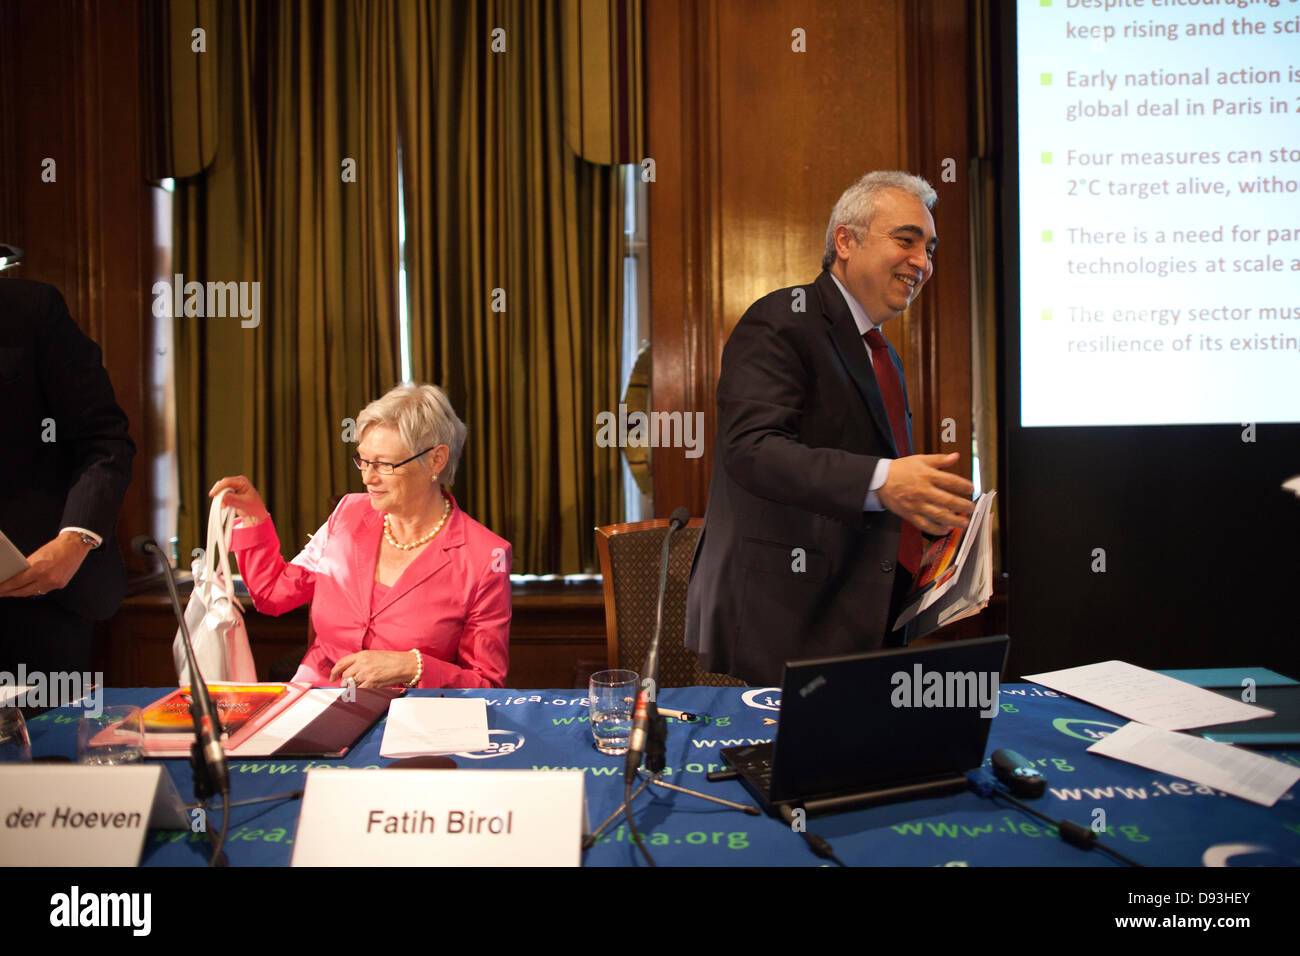 London, UK. 10th June, 2013.  Picture shows Fatih Birol, the Chief Economist and Director of Global Energy Economics with Maria van der Hoeven at the International Energy Agency conference today in London, UK. Stock Photo